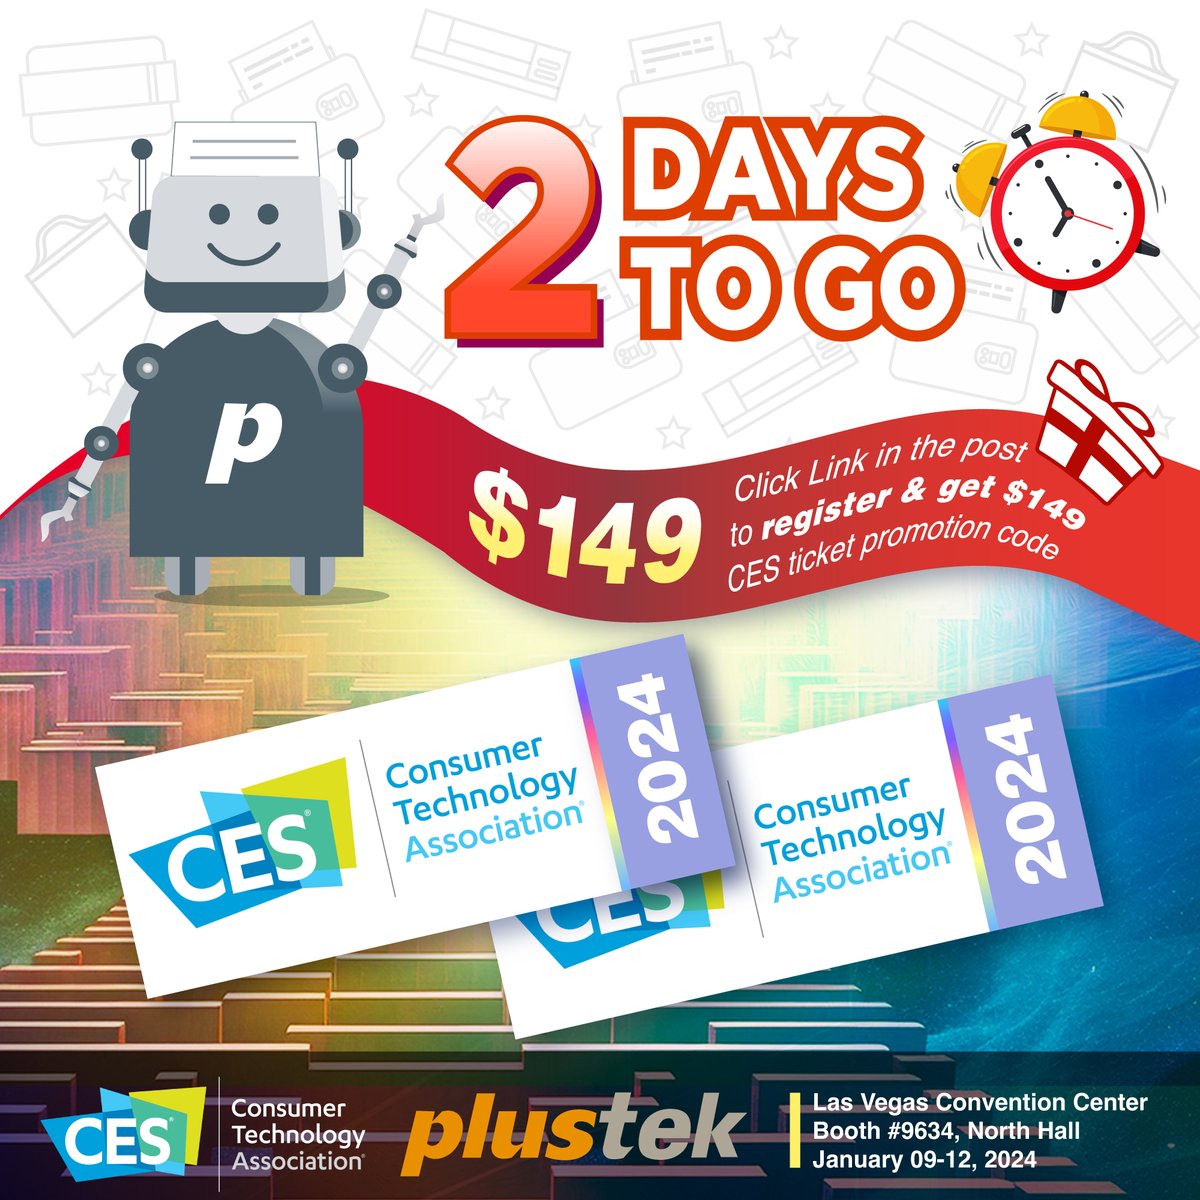 Join us at #CES2024 to discover the transformation of your workflow through Robotic Process Automation. 
👉 For more information about intelligent data capture solutions, visit us at:
plustek.com/us/news/events…

#plustekrpa #dataextraction #plustekextraction #IDP #workflowautomation